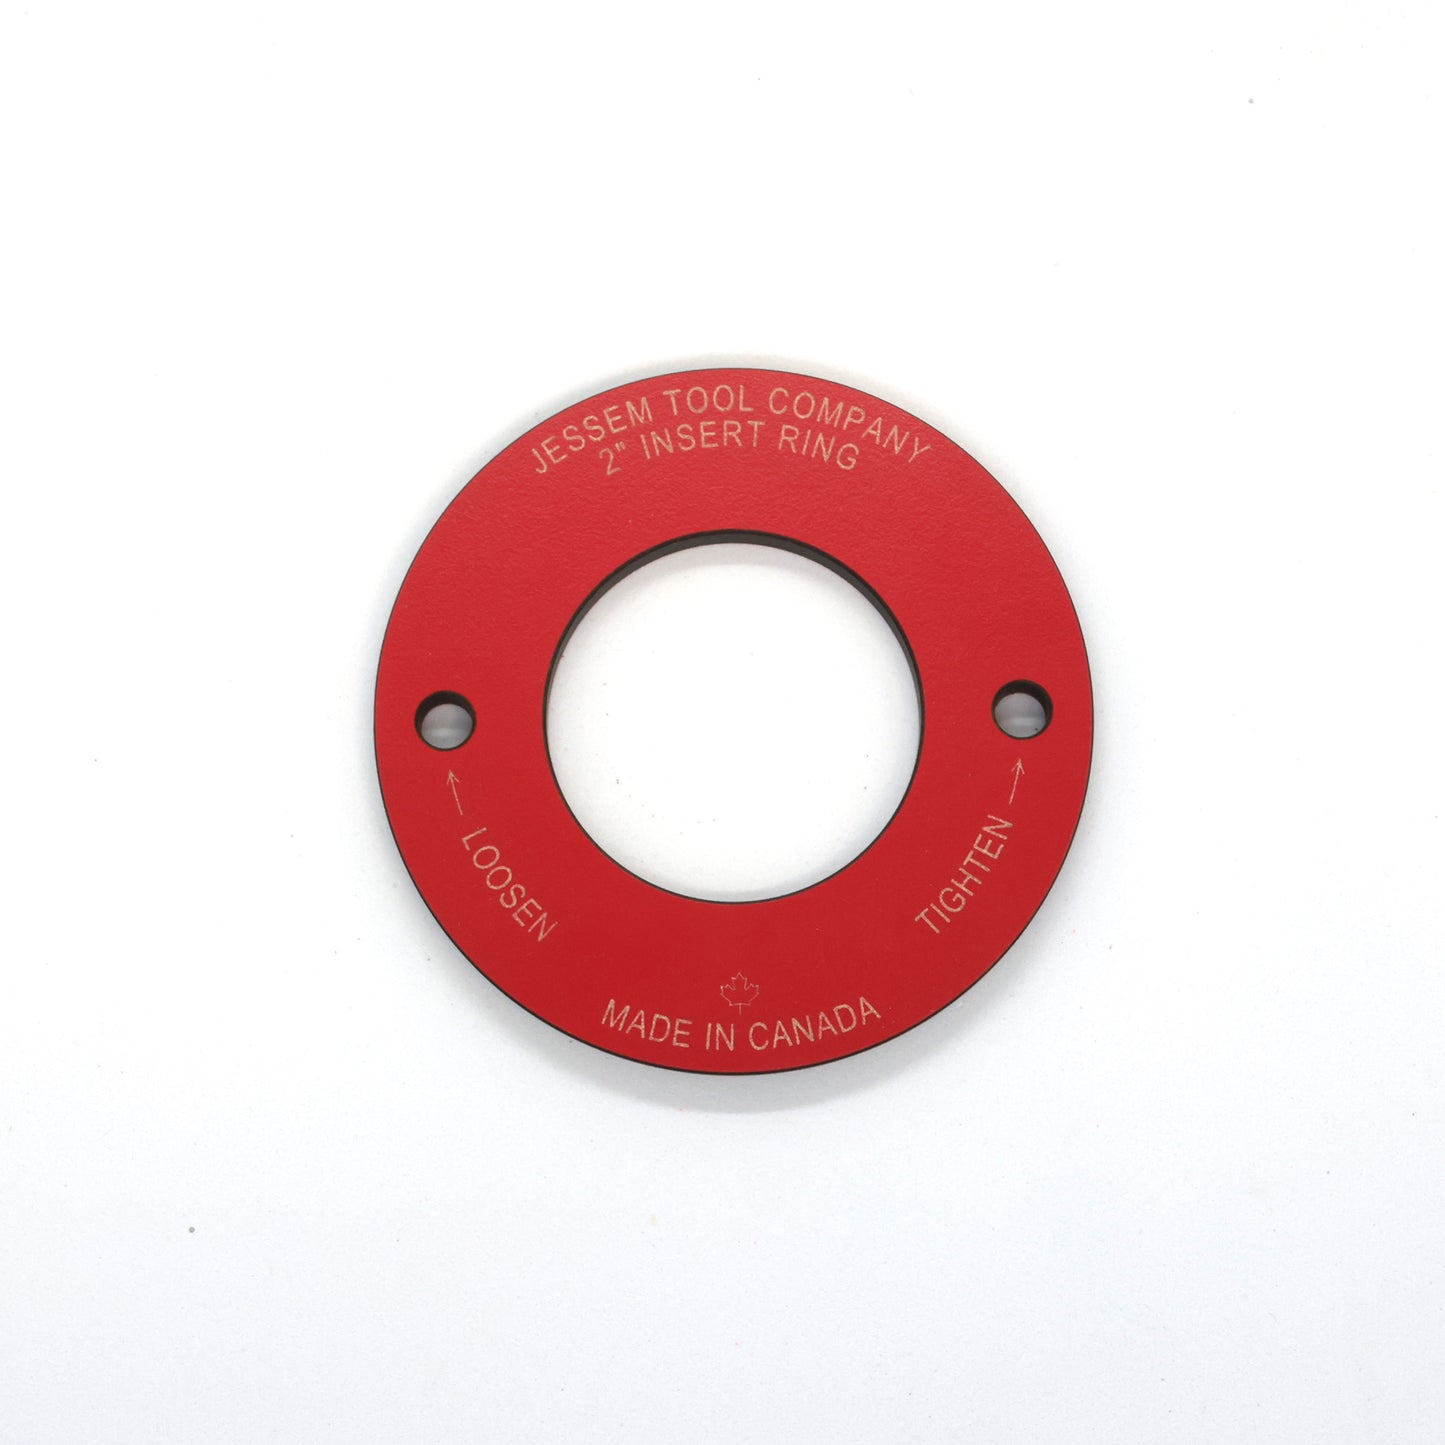 Phenolic Insert Rings For JessEm Router Lifts